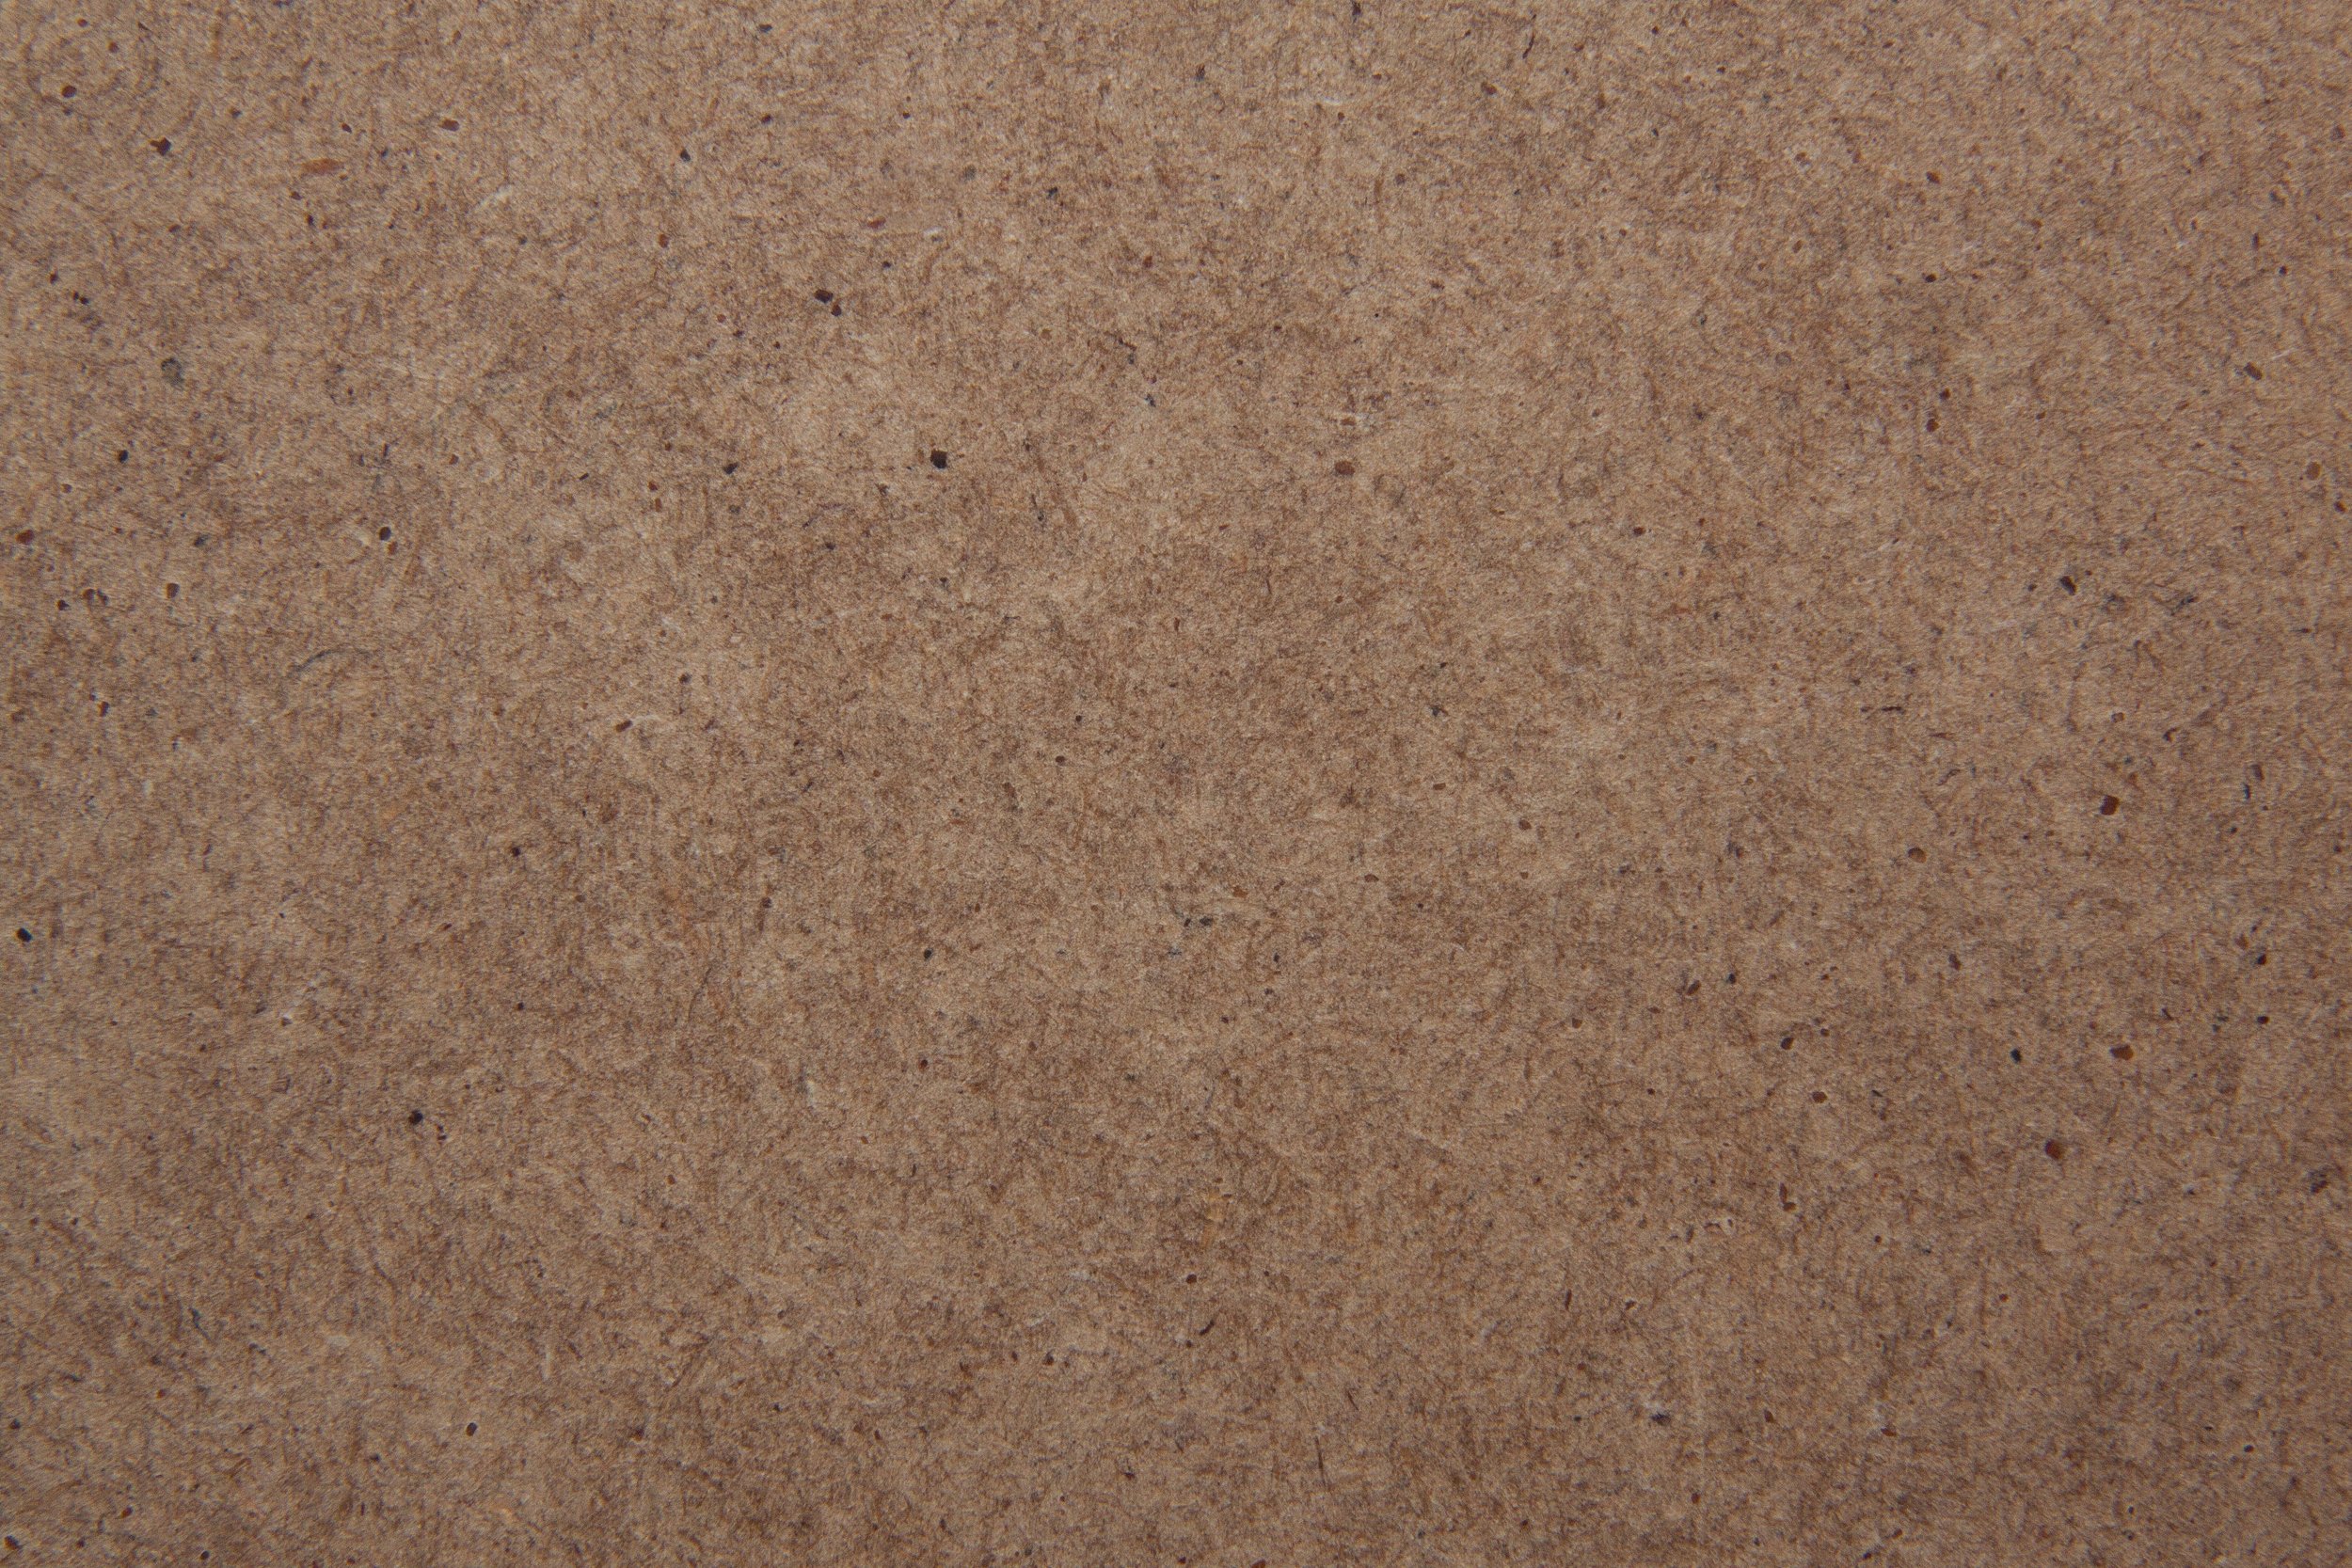 sand-structure-wood-floor-plate-brown-1013986-pxhere.com.jpg